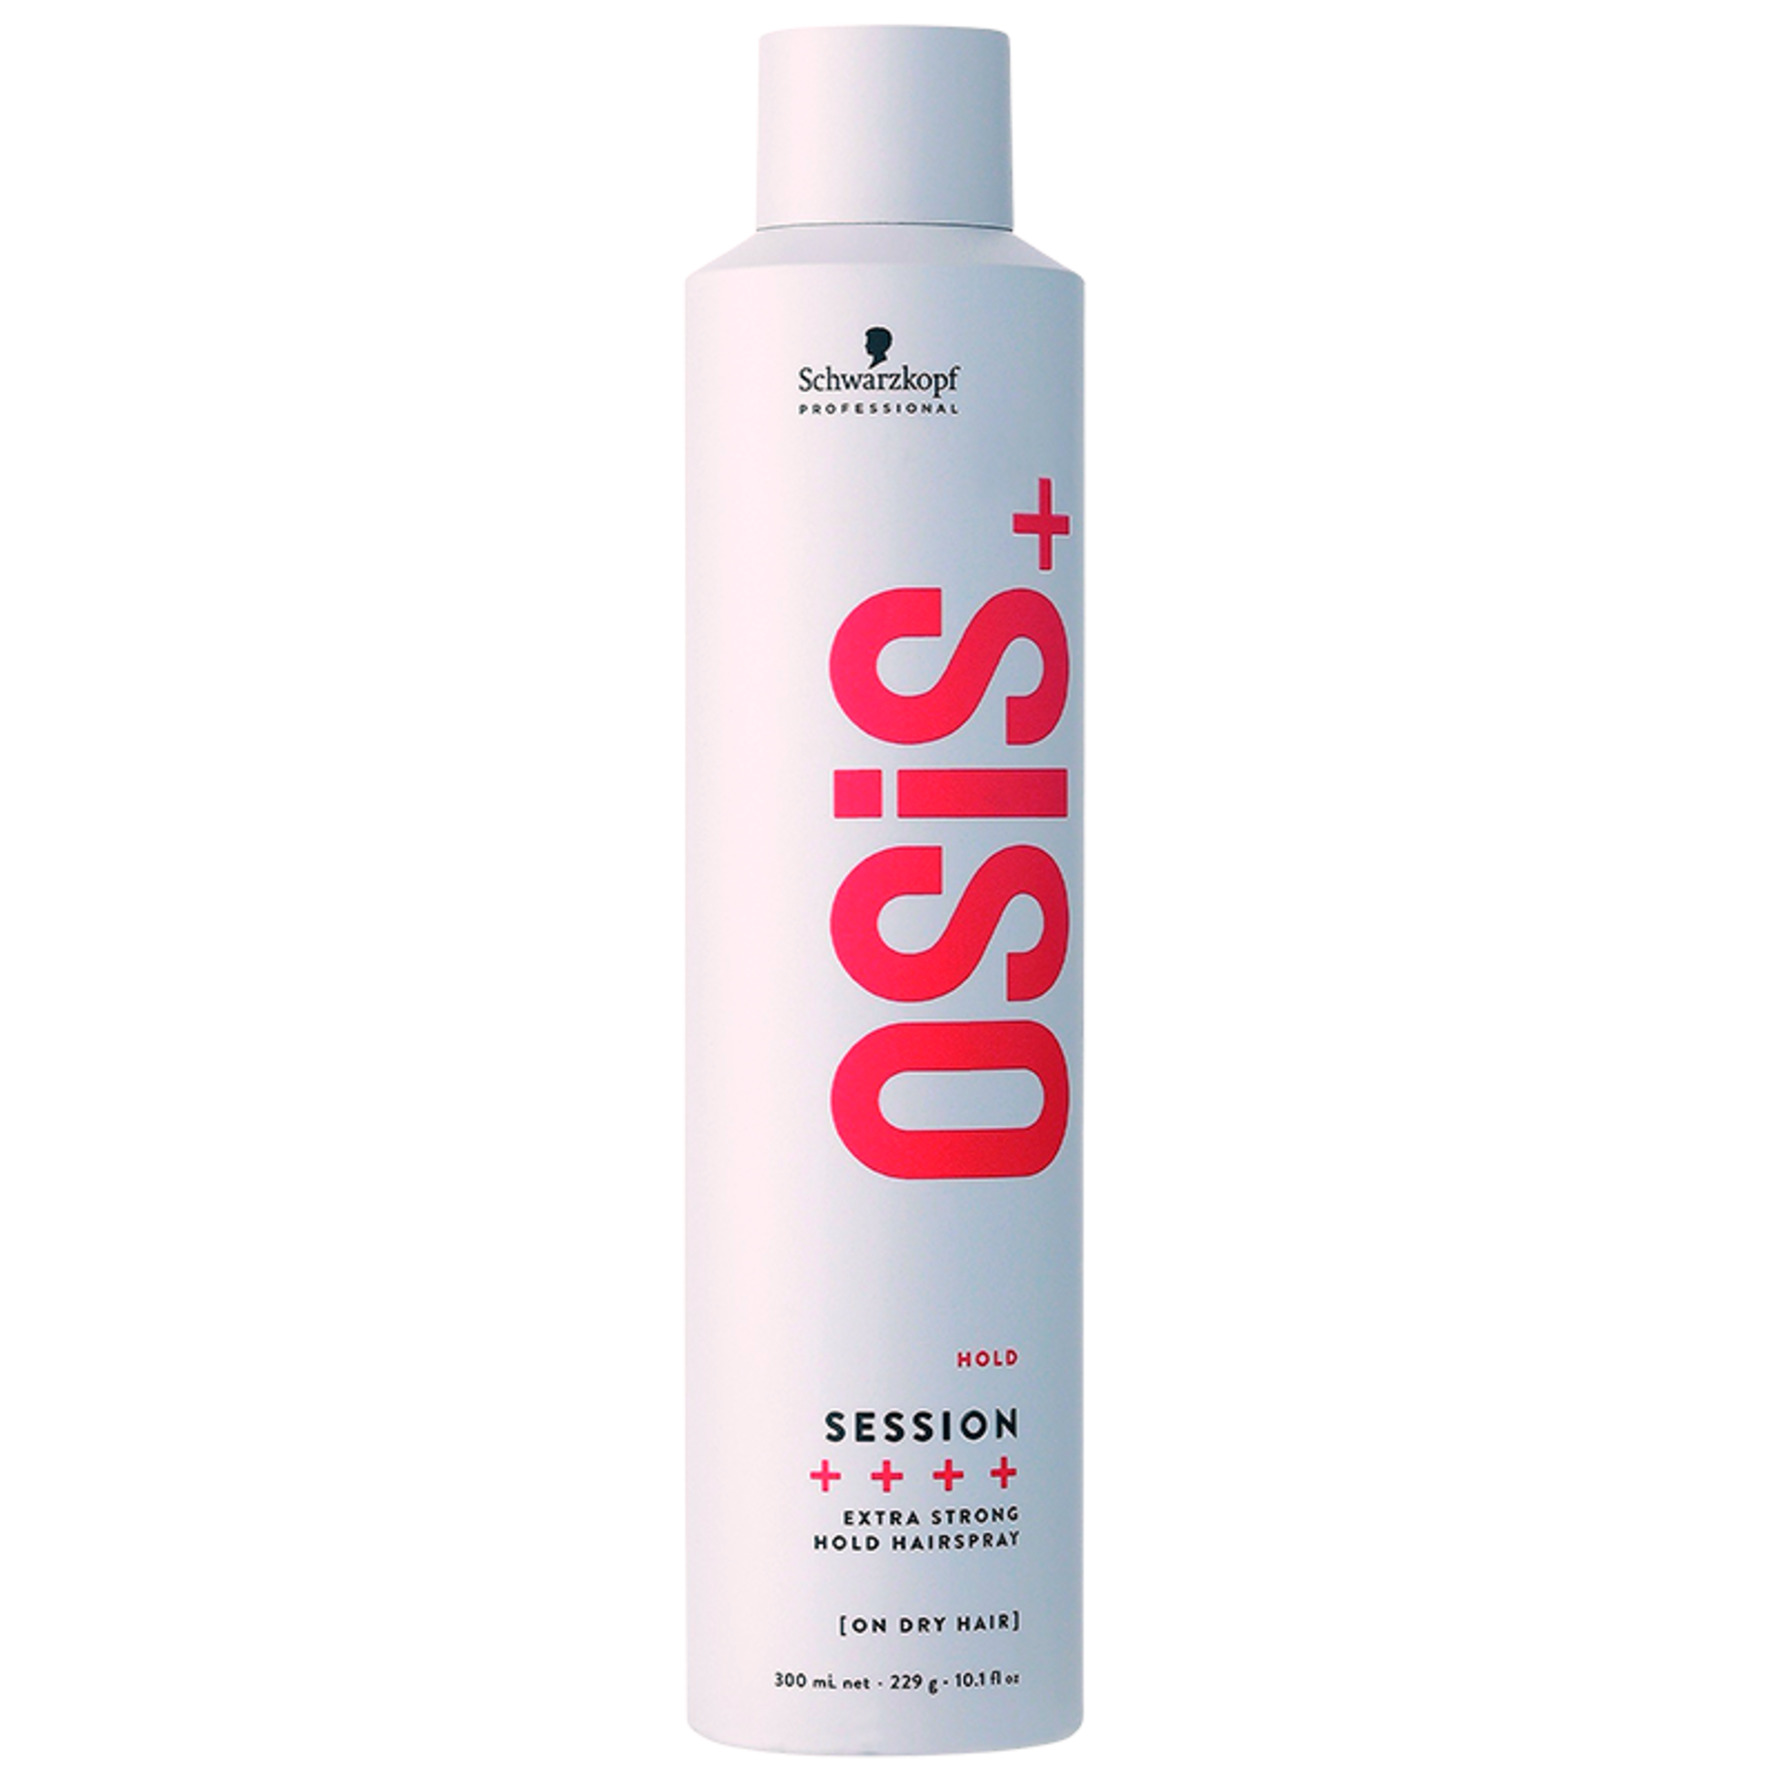 Køb Session Extra Strong Hold Hairspray 300 ml fra Schwarzkopf - Matas